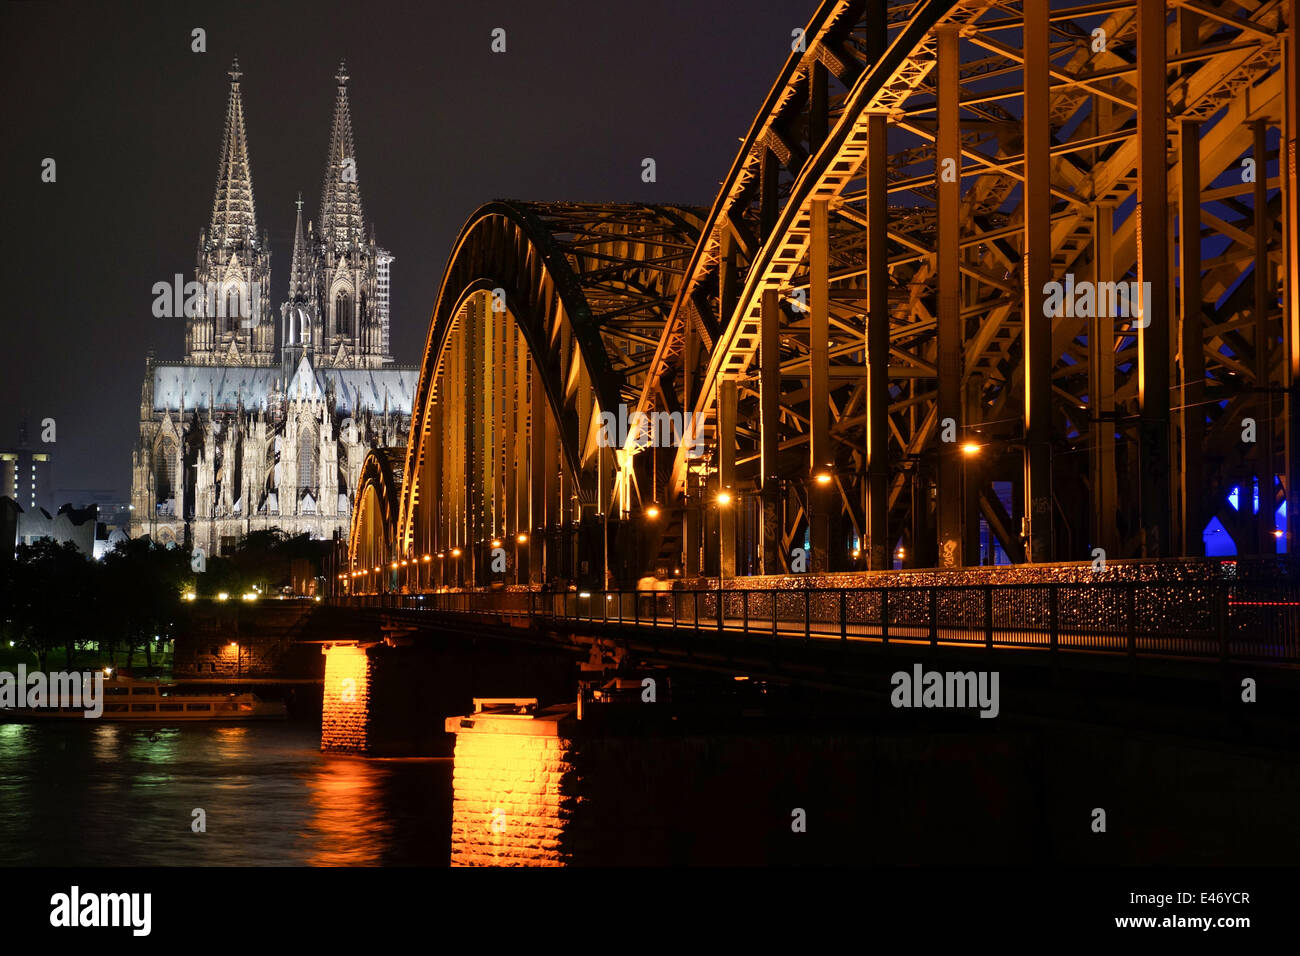 Germany: Hohenzollern Bridge with Cologne Cathedral. Photo from 22 September 2013. Stock Photo